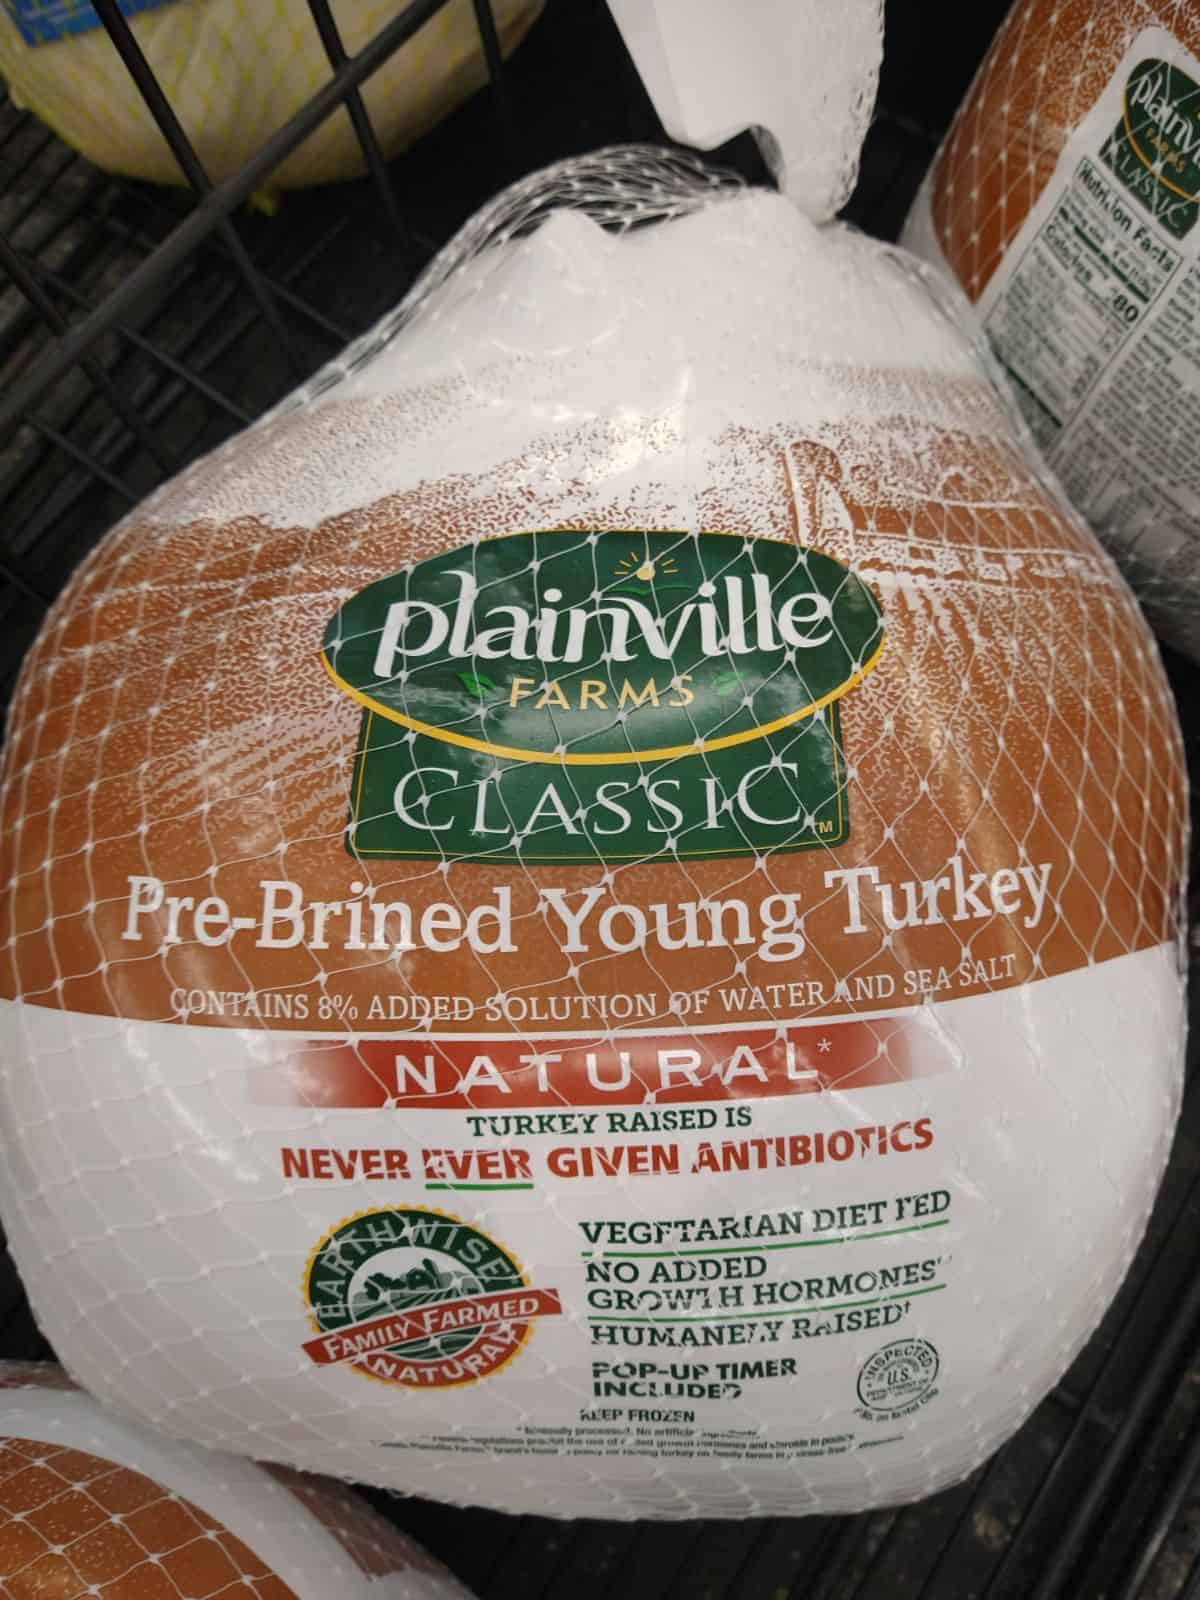 Plainville Farms Classic Pre-Brined Young Turkey in packaging at the store.